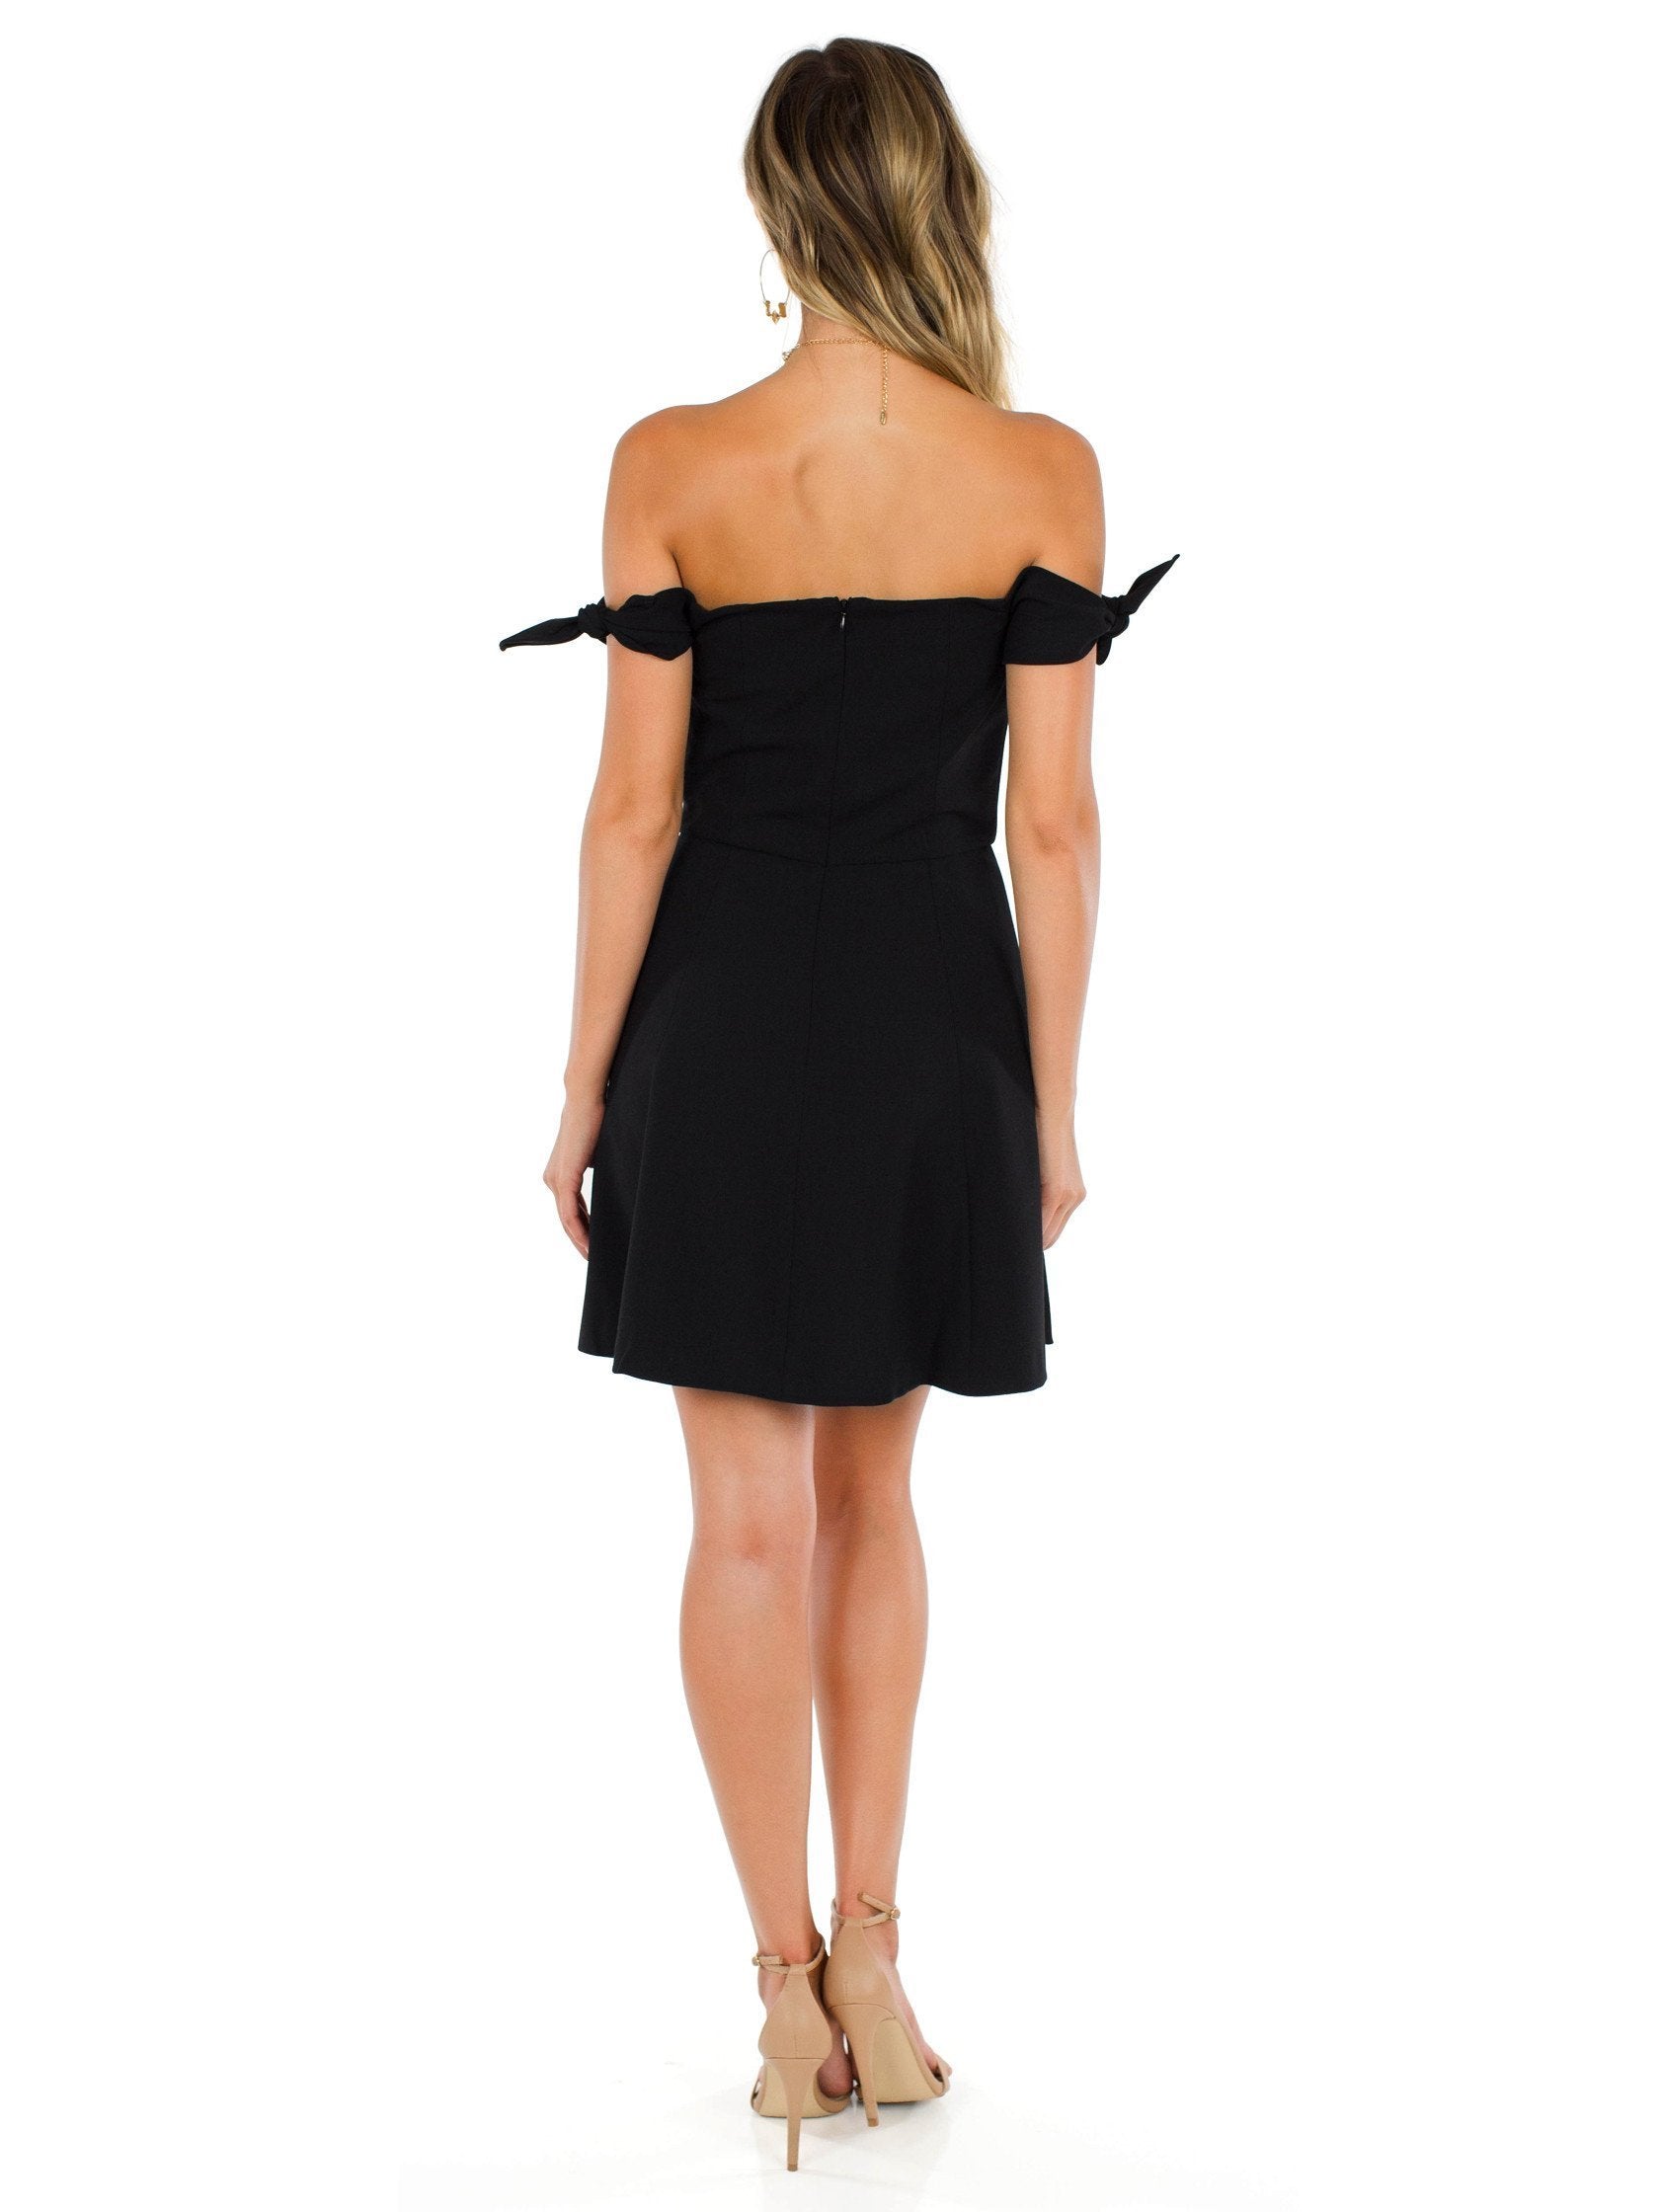 Women wearing a dress rental from French Connection called Whisper Light Off The Shoulder Dress